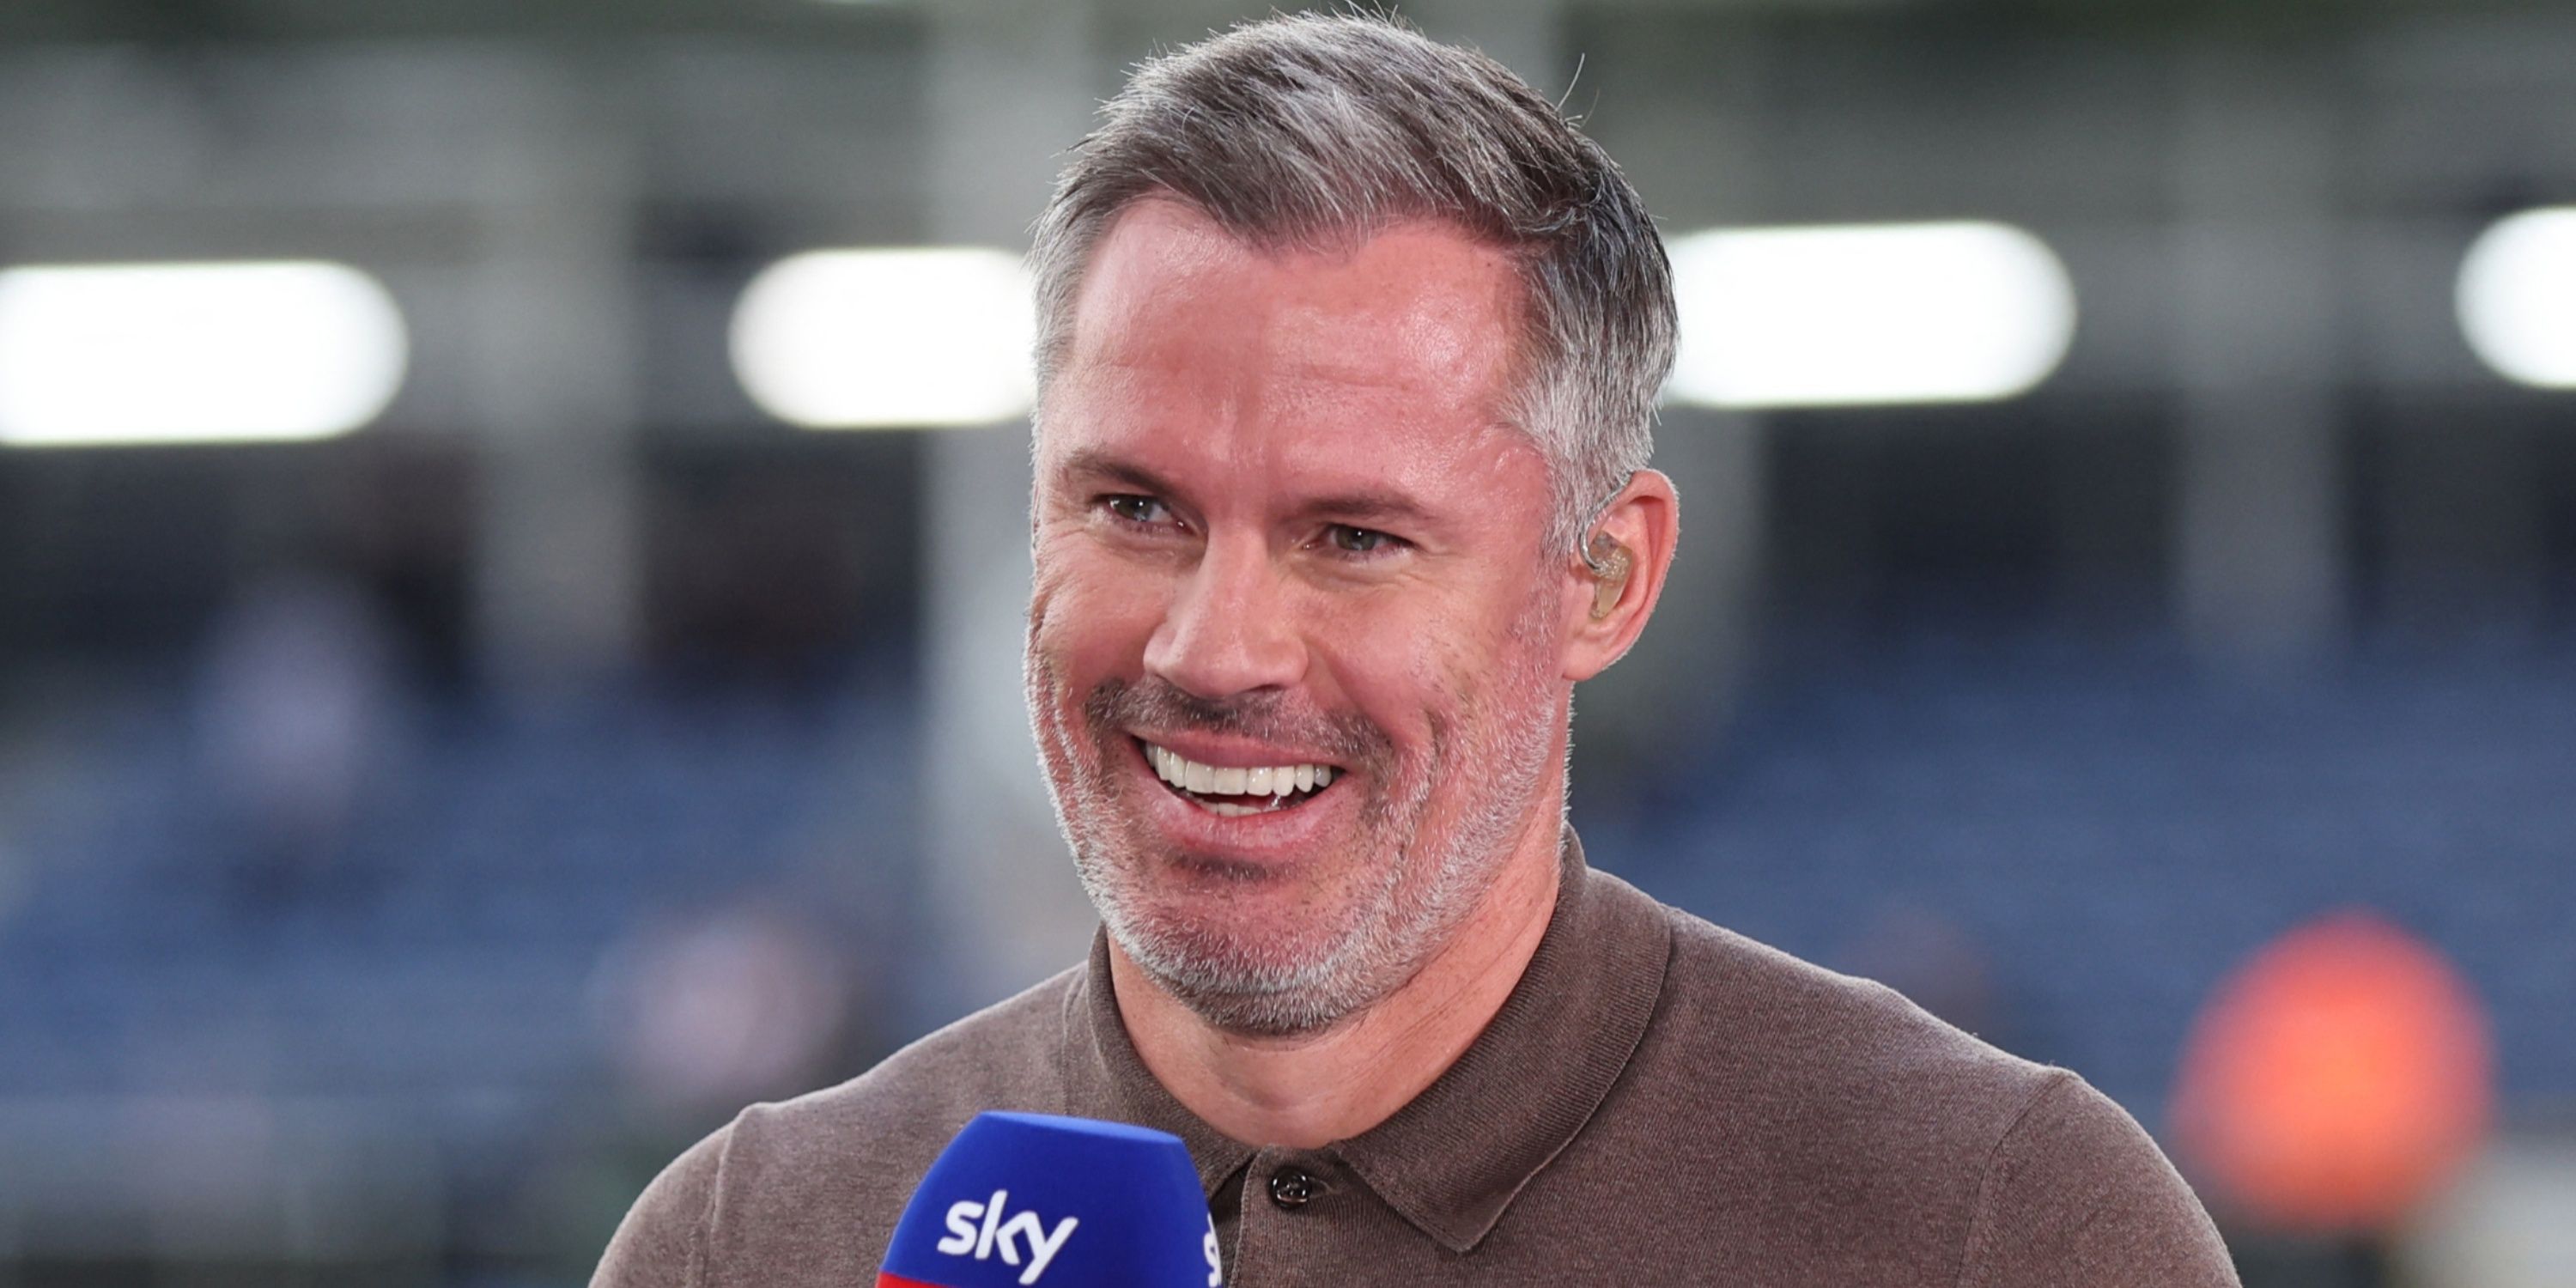 Jamie Carragher as a pundit for Sky Sports